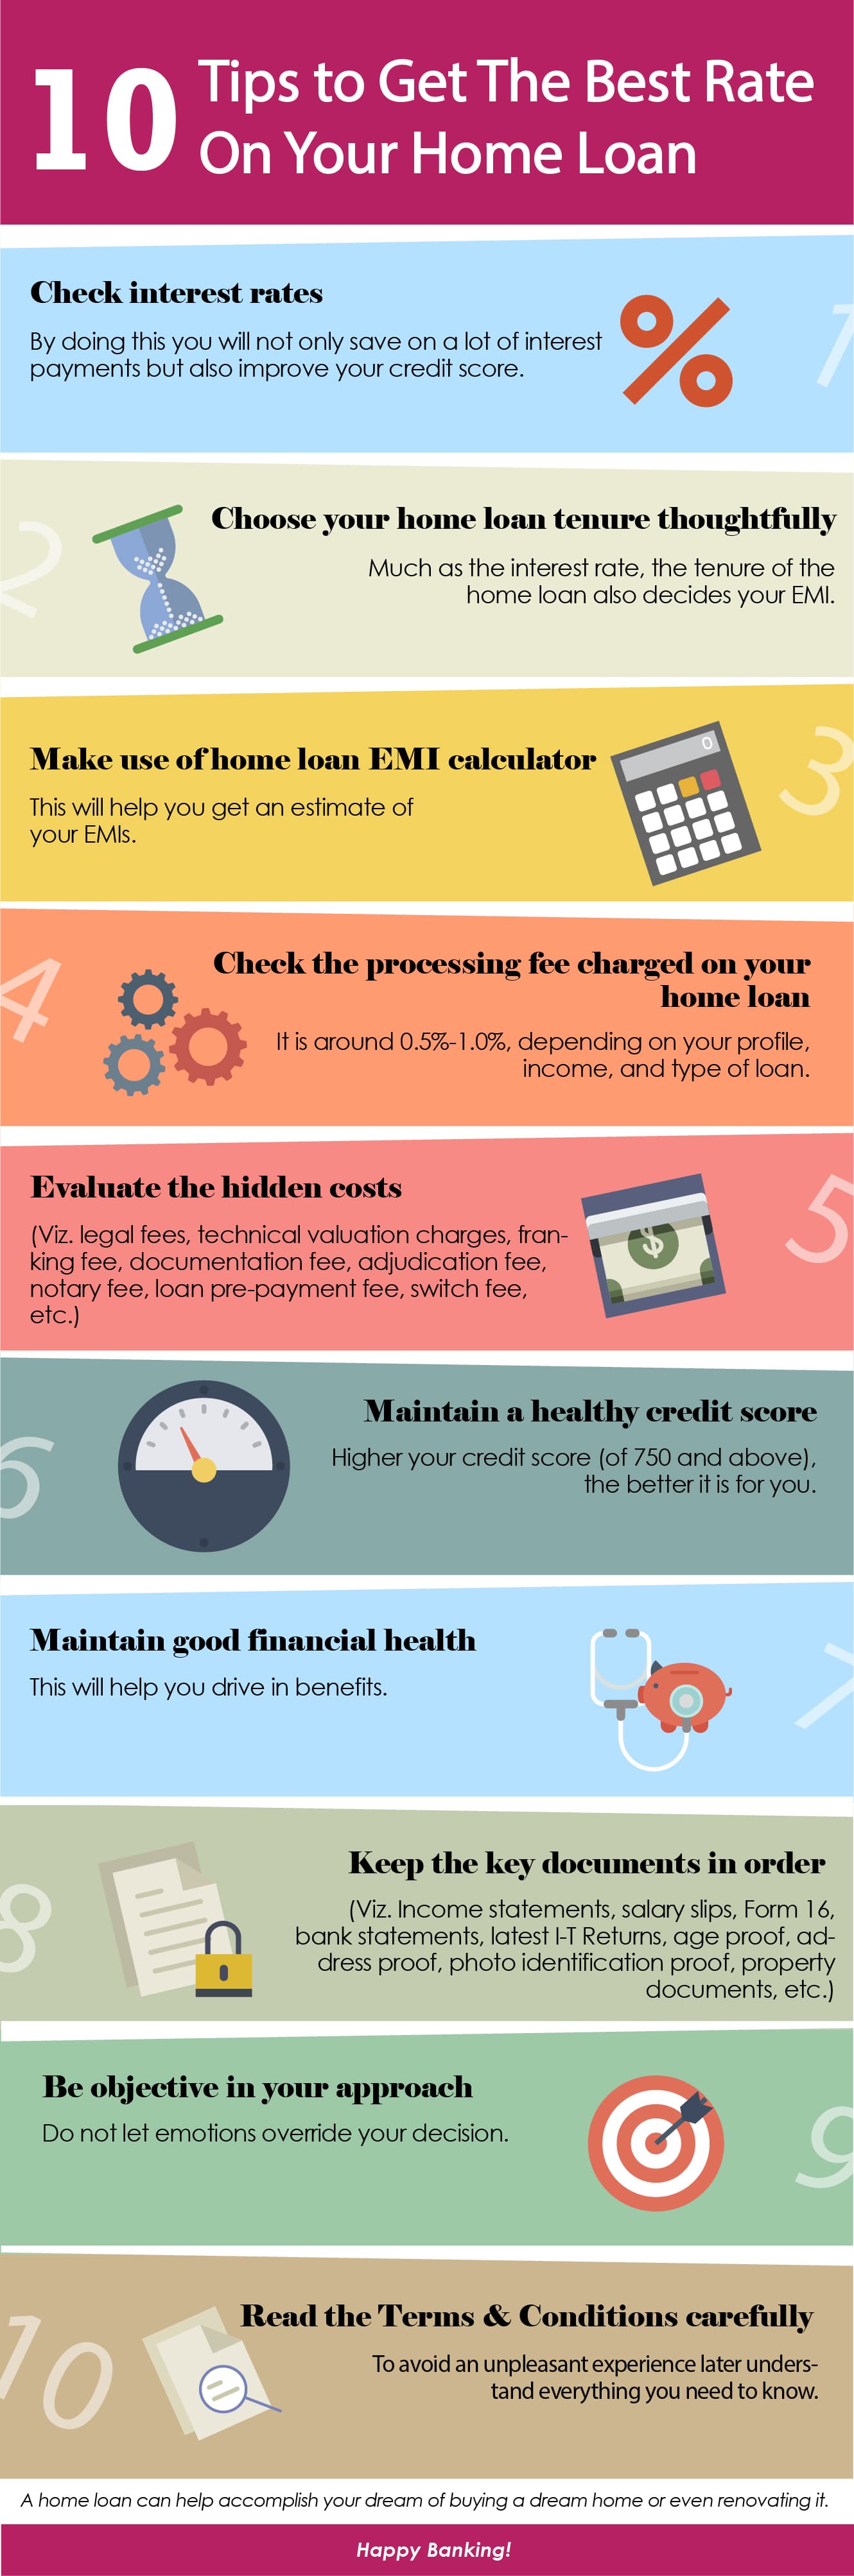 10 Tips to Get The Best Rate On Your Home Loan